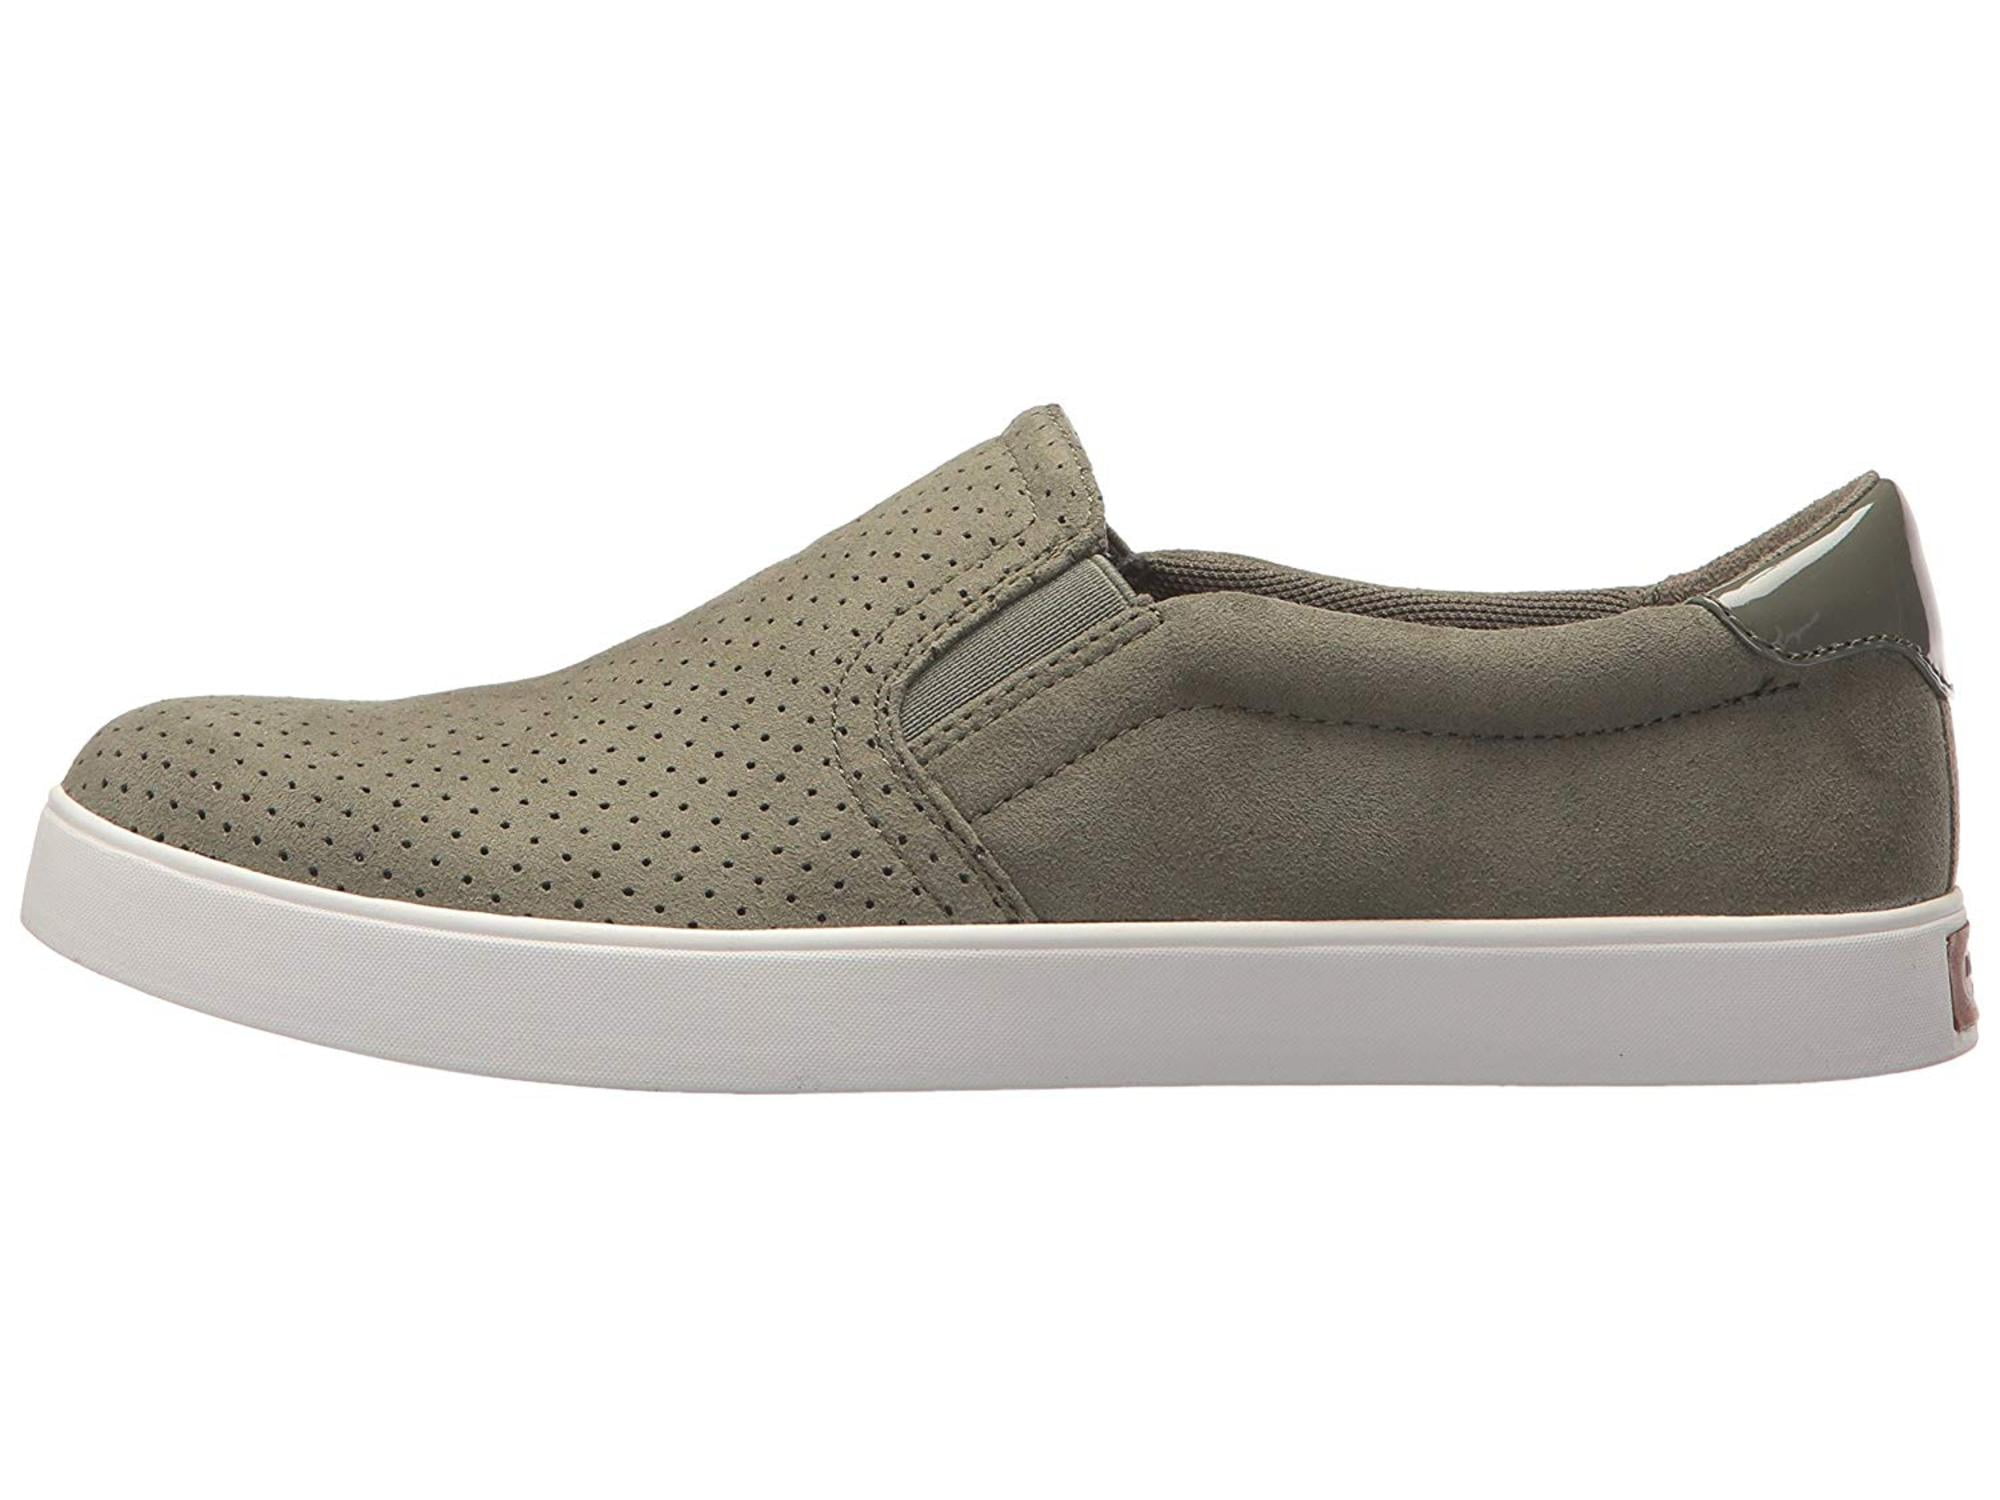 Dr. Scholl's Shoes - Dr. Scholl's Shoes Womens F6496FA Fabric Low Top ...